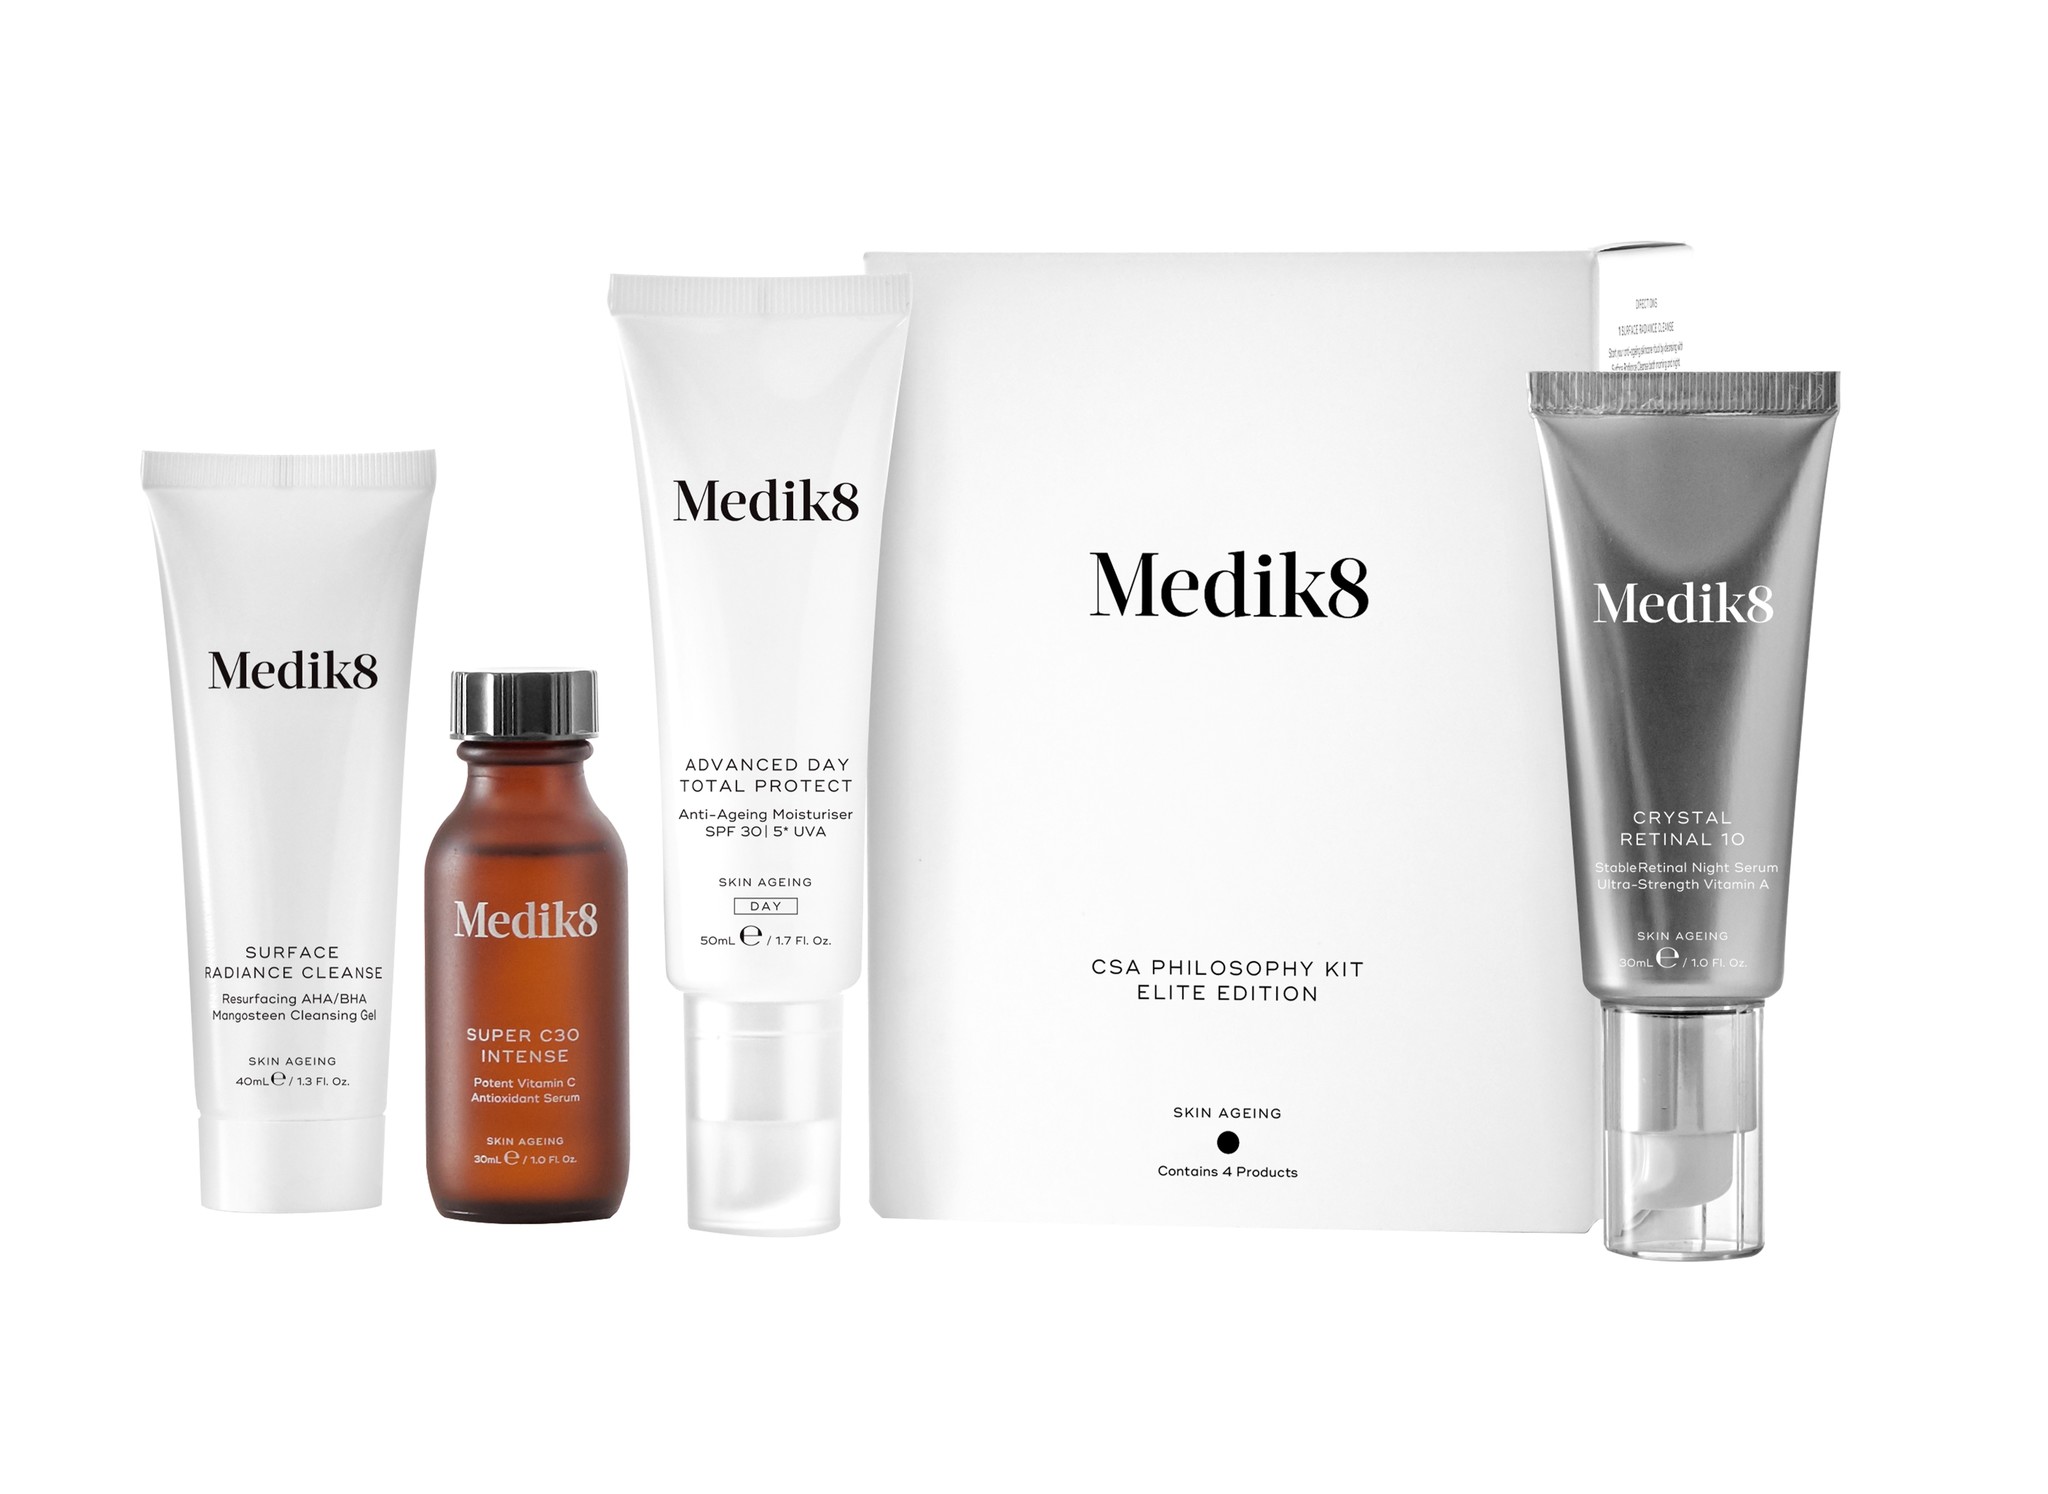 Medik8 Contains 4 products | Surface Radiance Cleanse, Super C30 Intense, Advanced Day Total Protect, Crystal Retinal 10